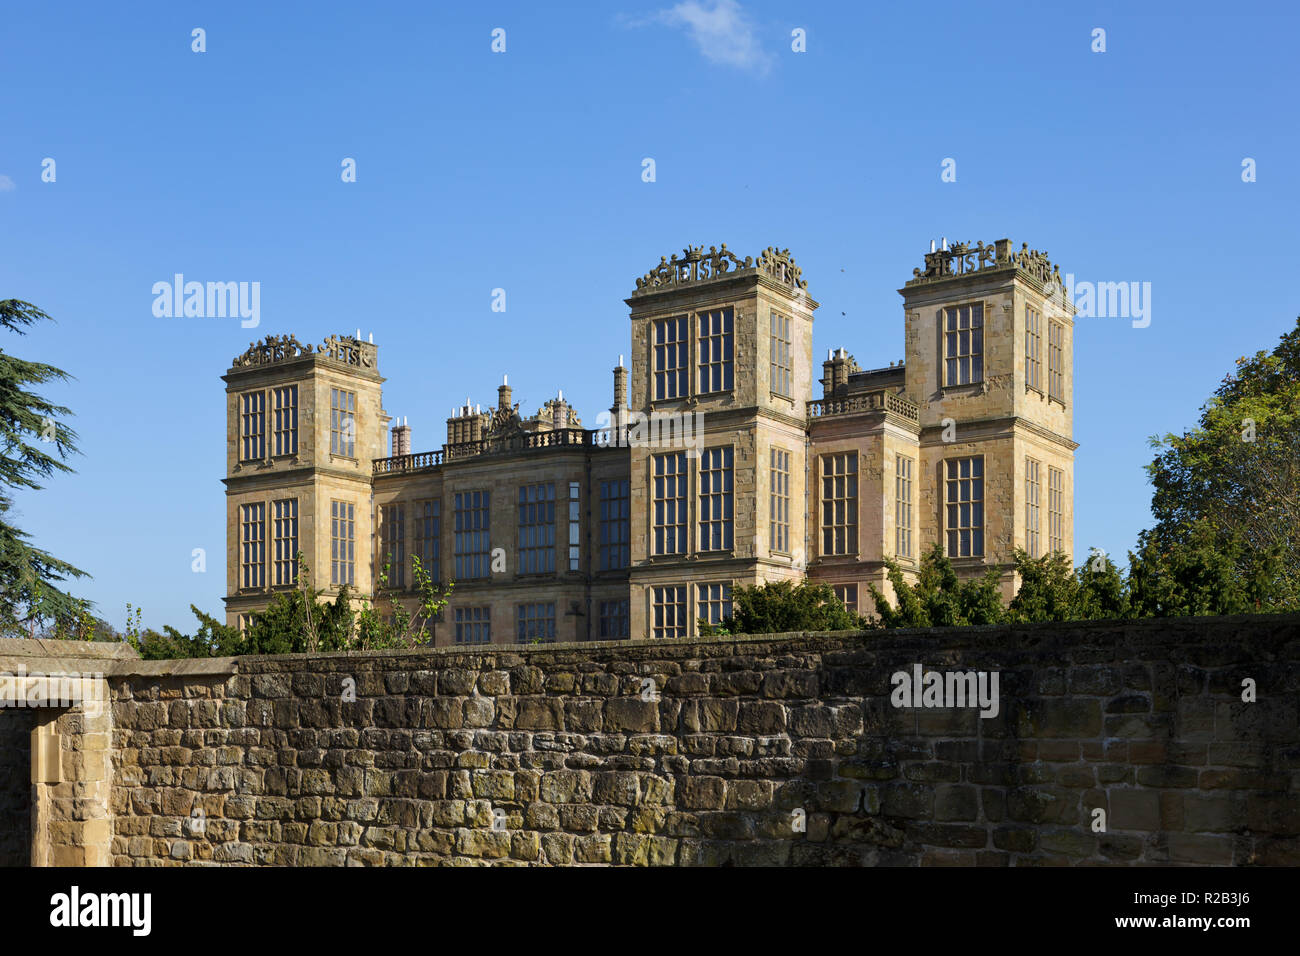 Hardwick Hall, Elizabethan country house in Derbyshire, England Stock Photo